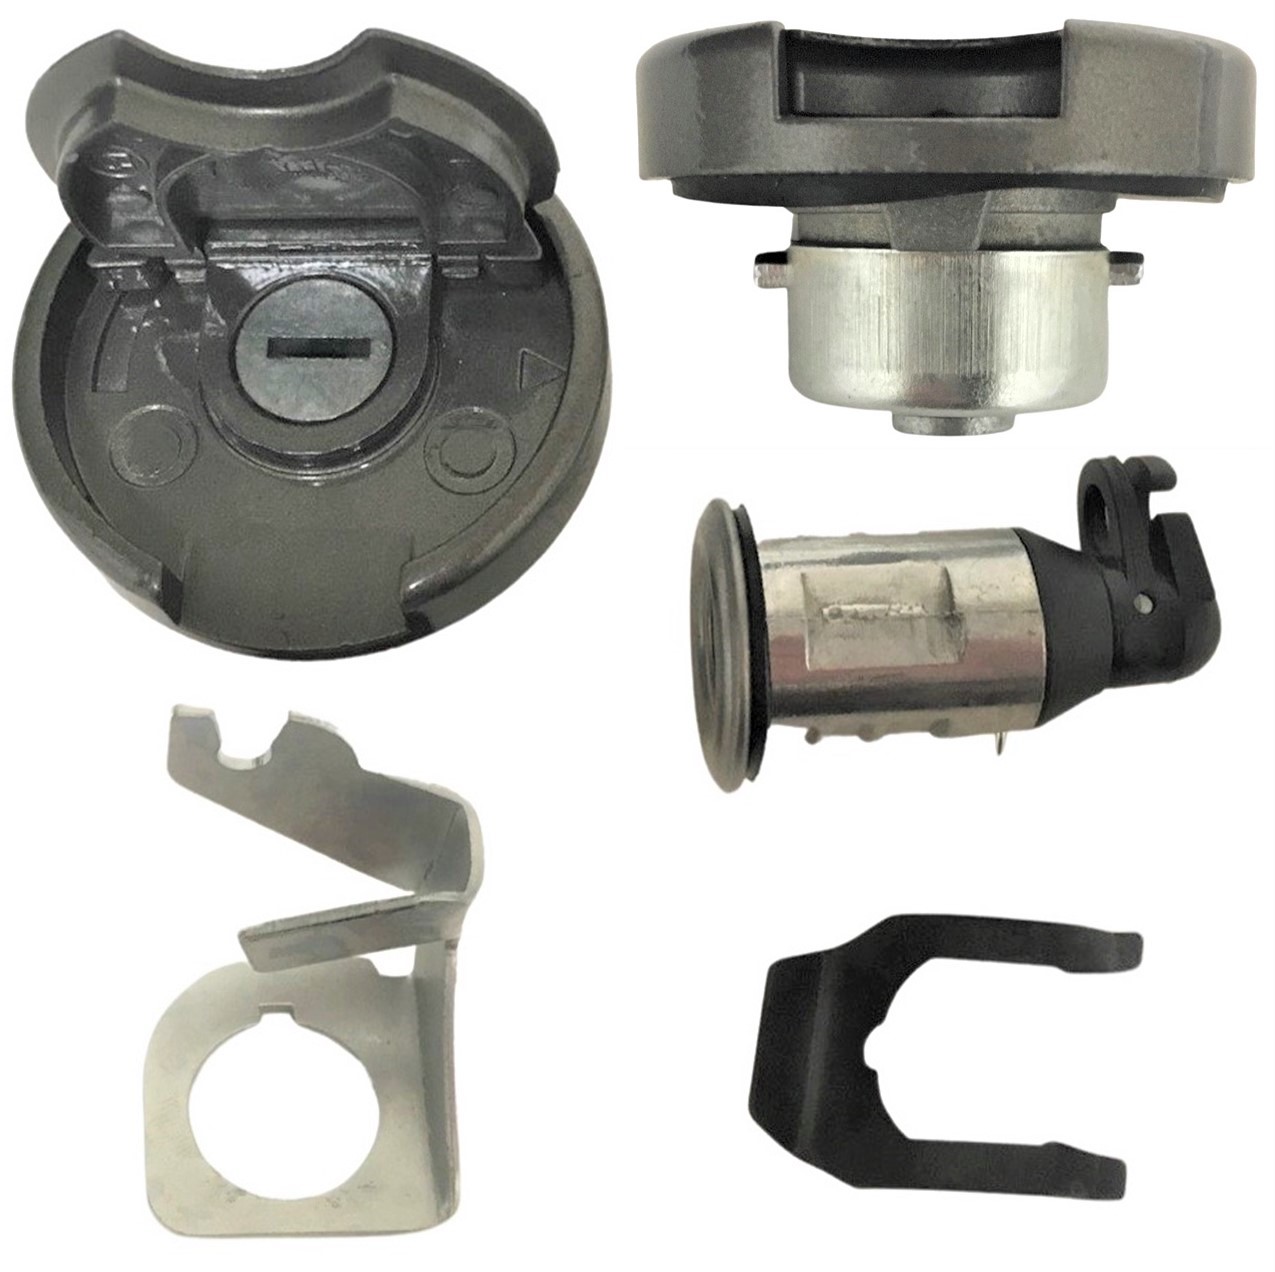 Ignition Switch Set Fits Tao Tao ATM50, Baja SC50S-345 + Many 49-150cc Chinese Scooters 5 Pins in 6 Pin FM Jack Ign Bolts c/c=28 Latch Bolts c/c=55 - Click Image to Close